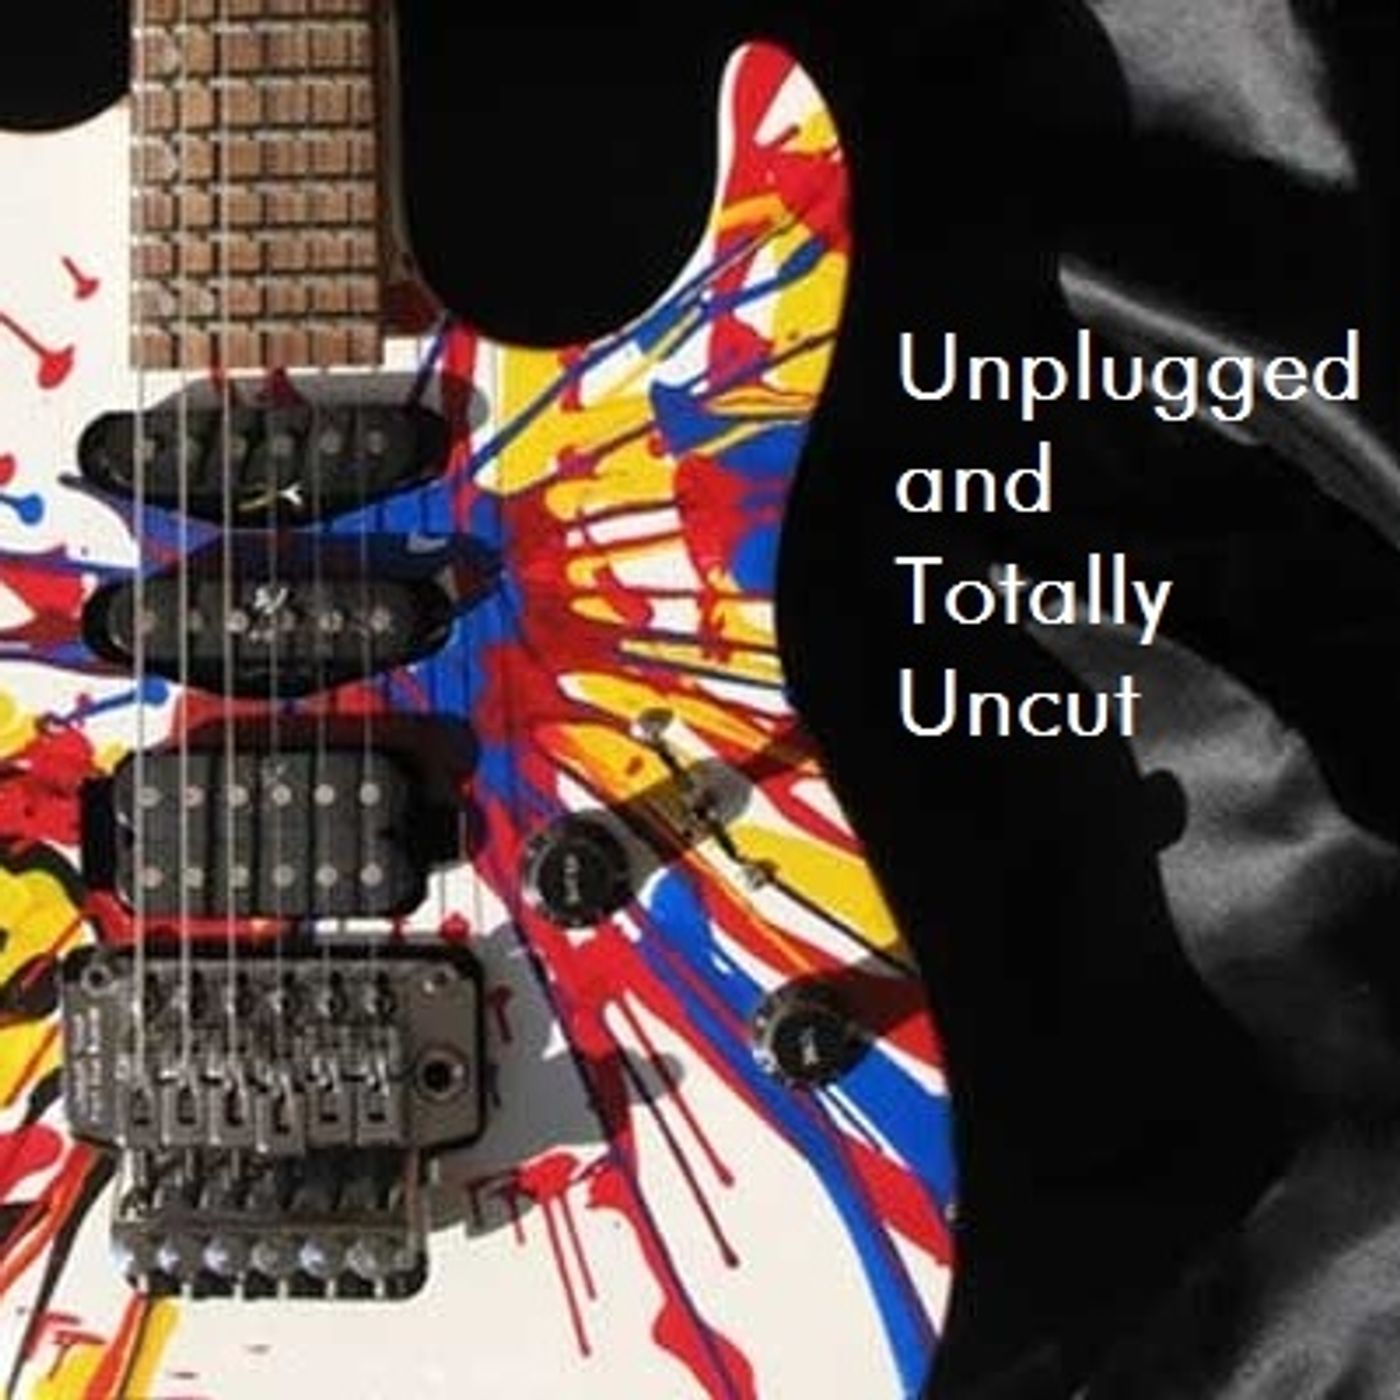 Arroe Collins: Unplugged & Totally Uncut